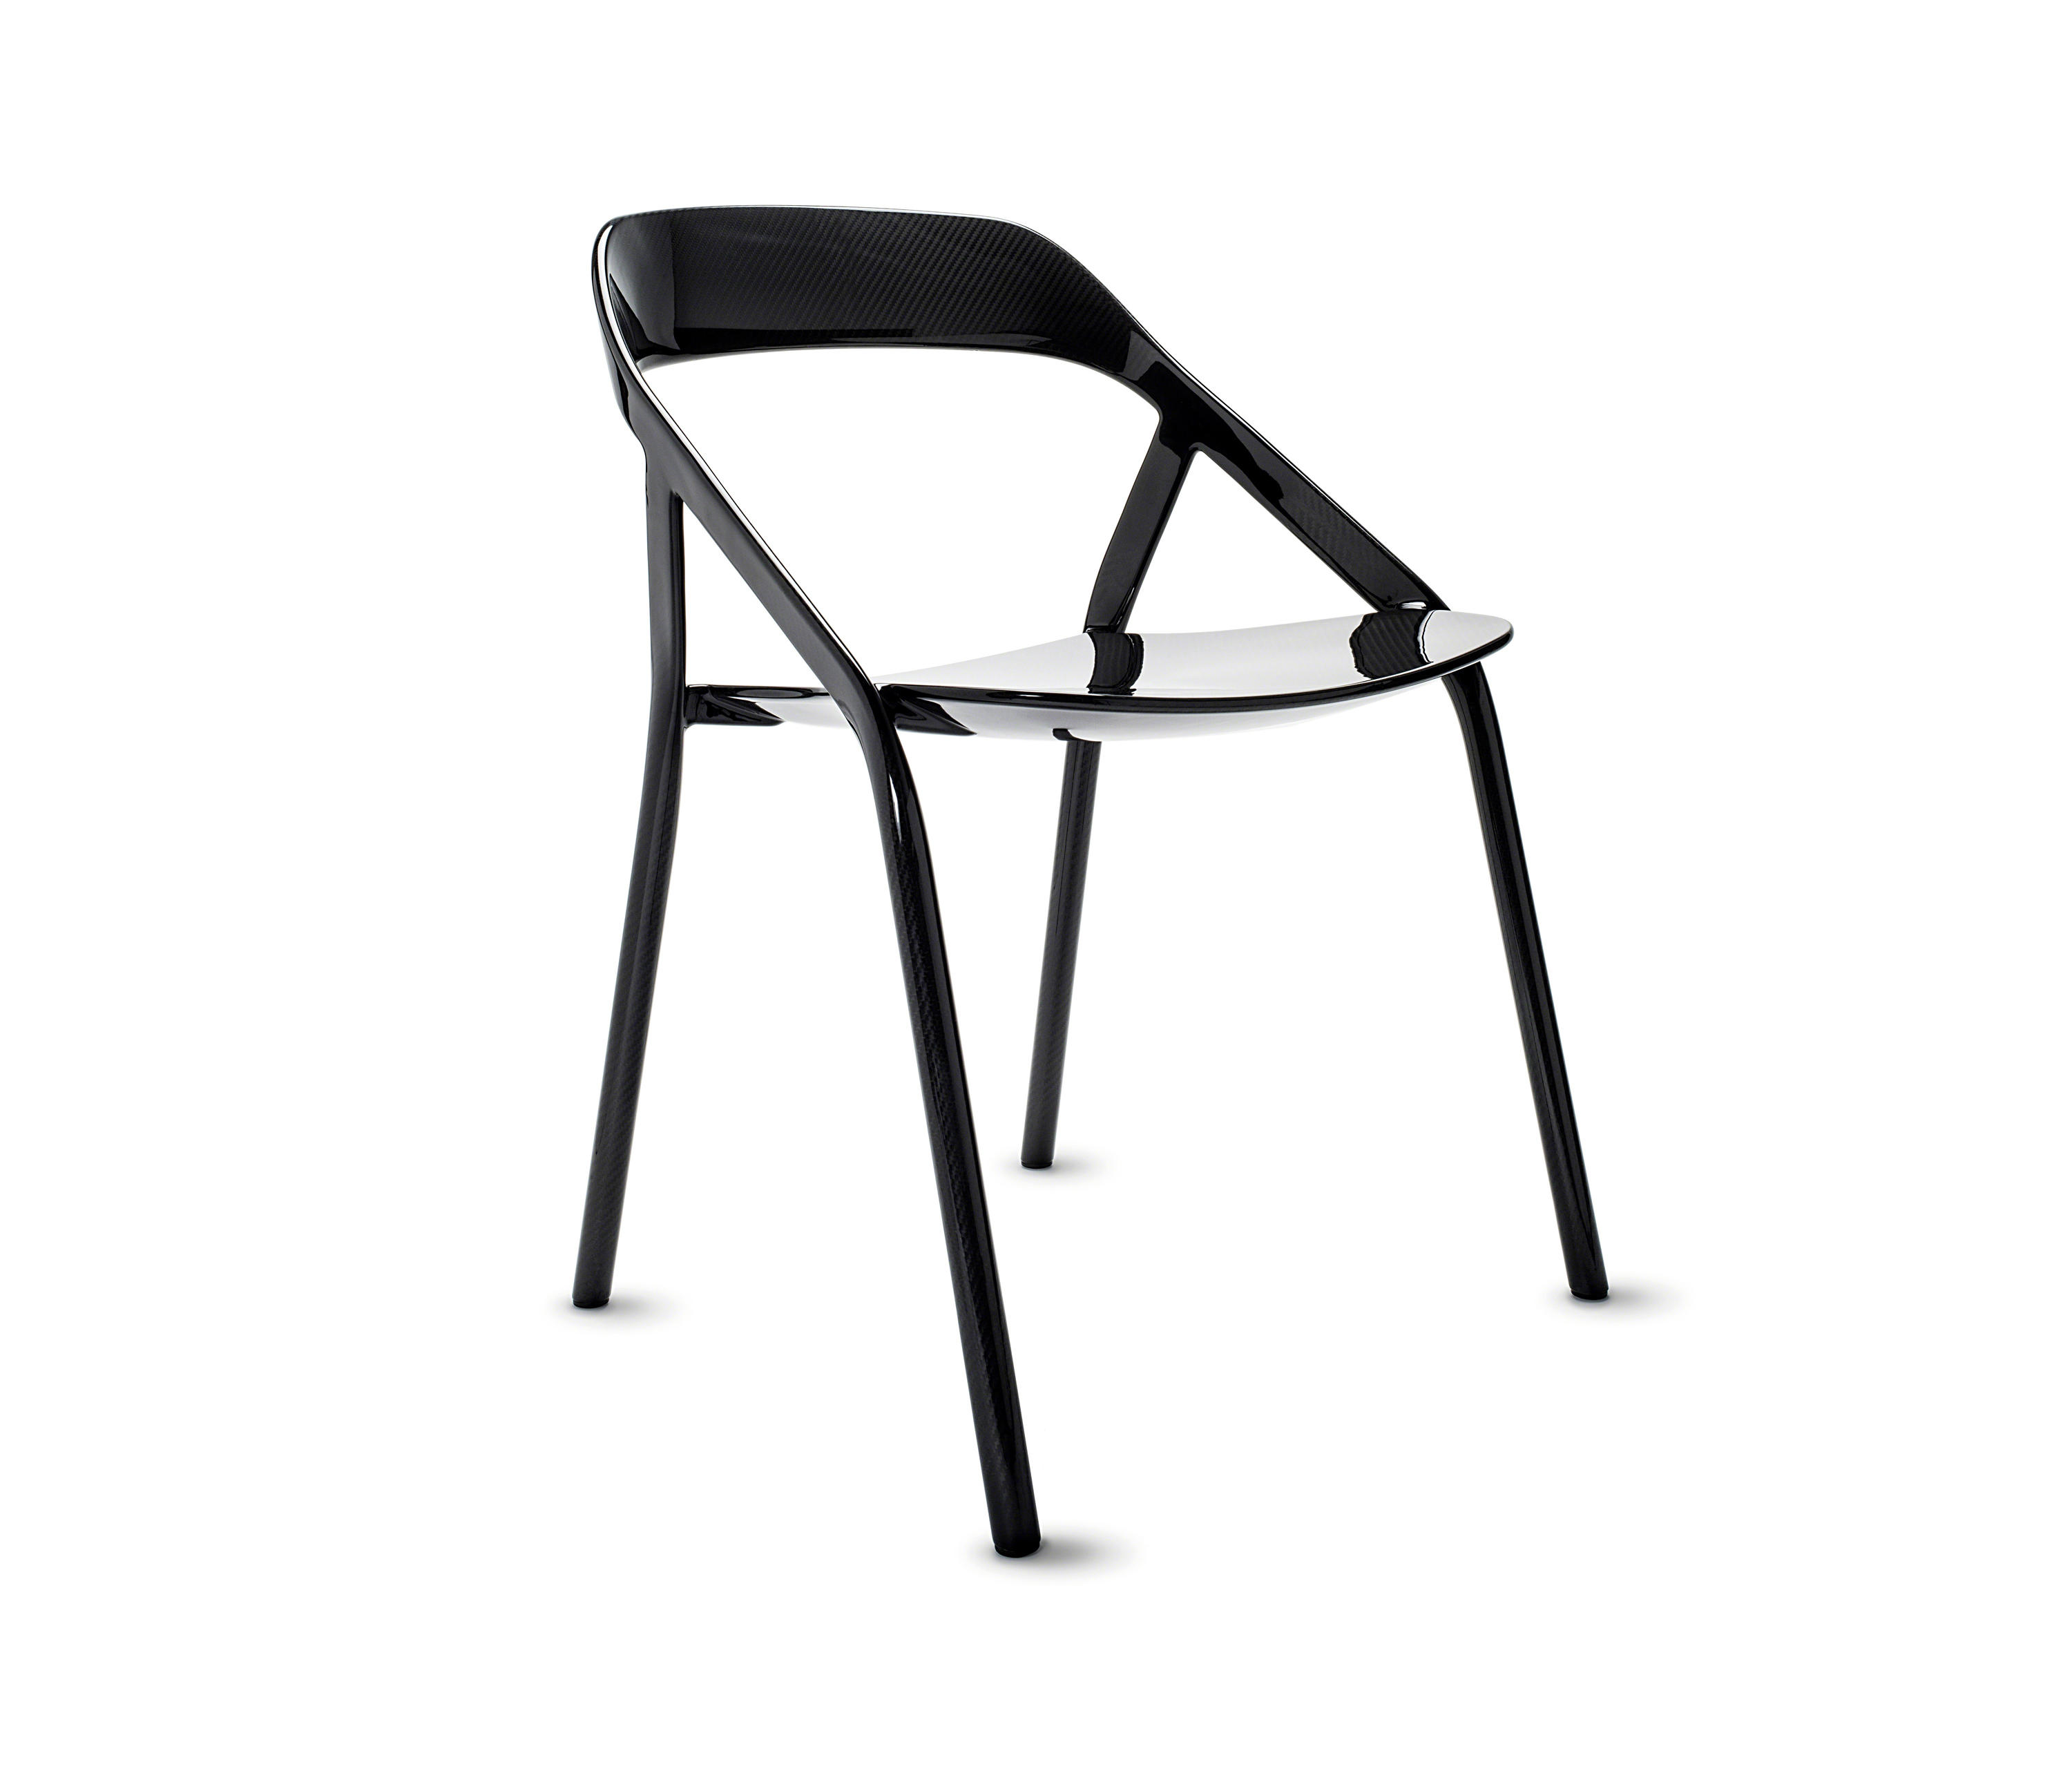 Lessthanfive Chair Designer Furniture Architonic